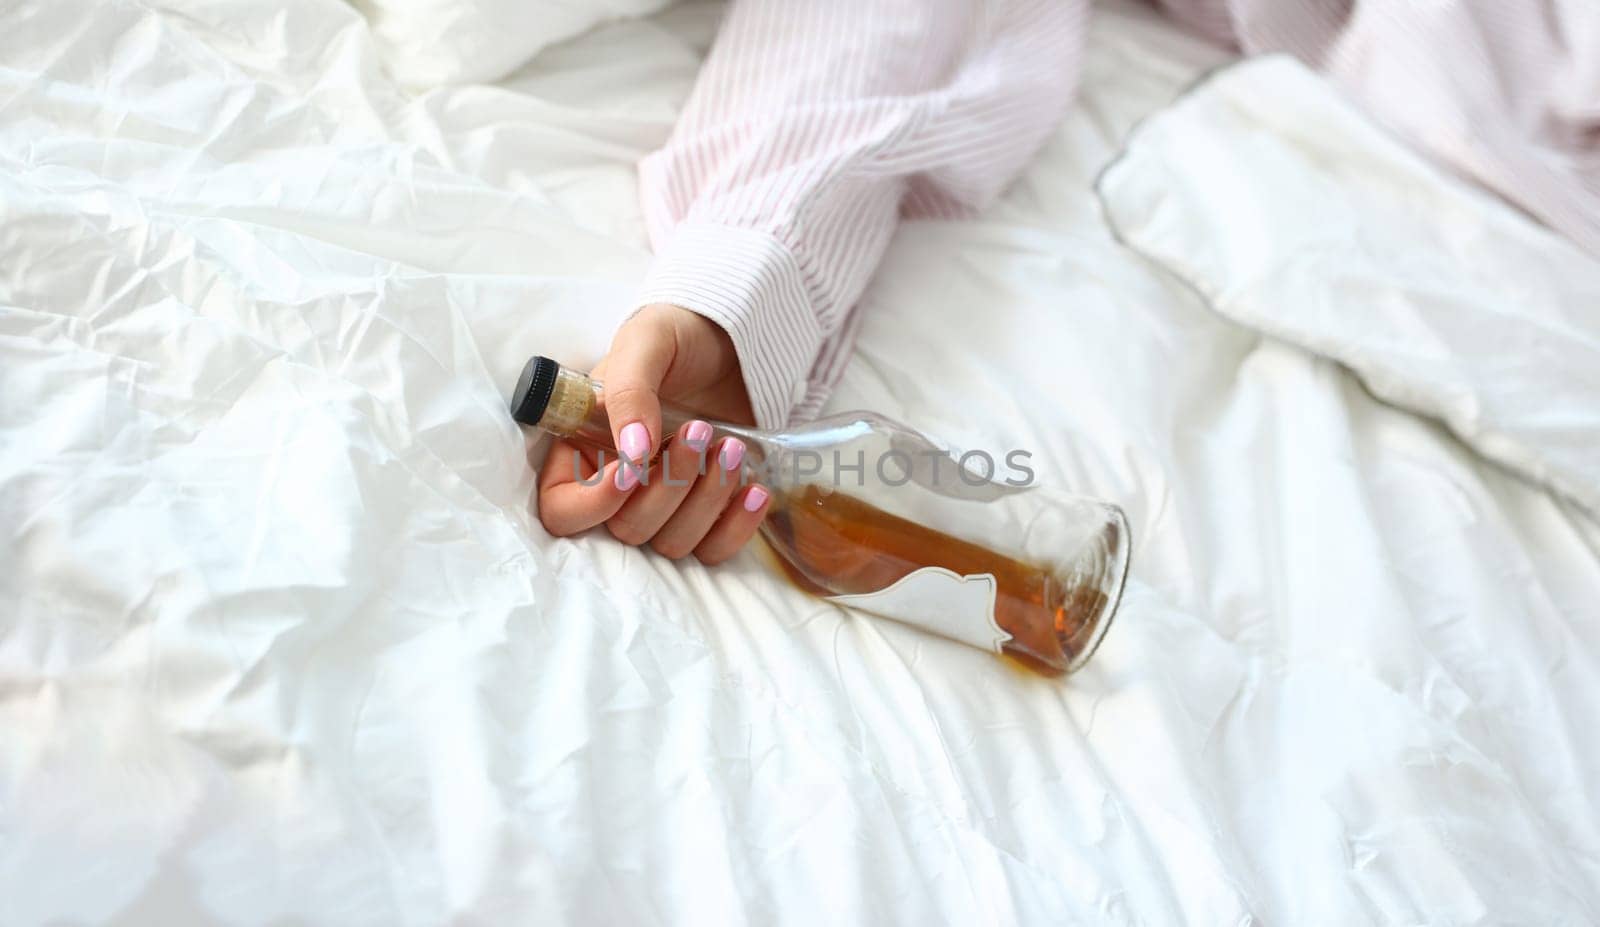 Young woman lying in bed deadly drunken holding near-empty bottle of booze. Female intoxicated with alcohol after tough night party. Alcoholism habitual drunkenness pernicious habit concept